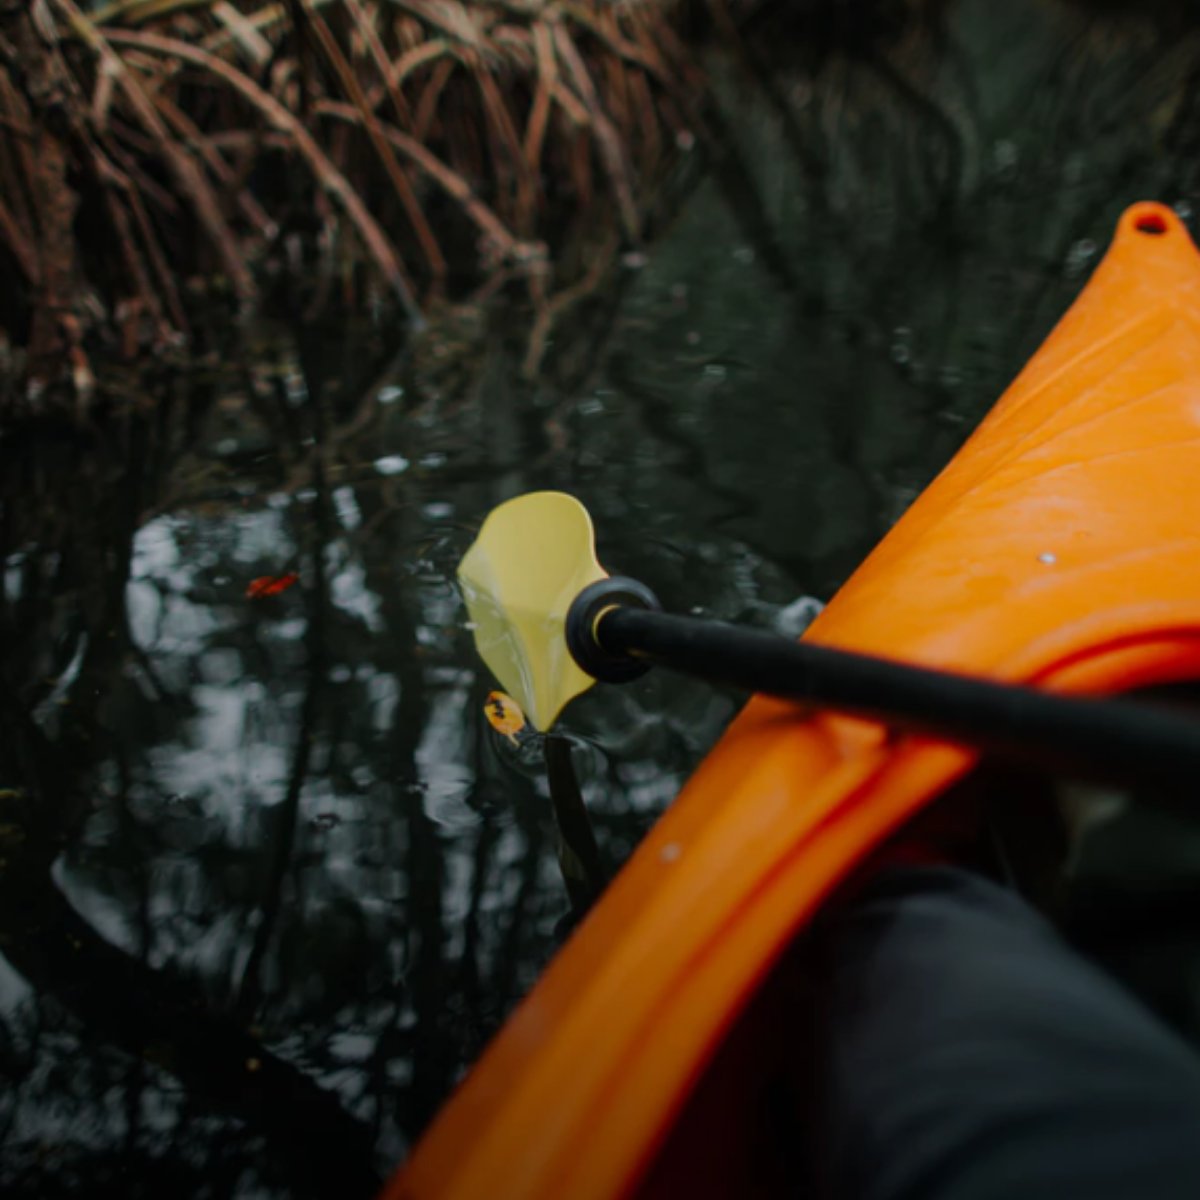 The low profile and silence of our kayaks allows you to observe wildlife in an up-close and nonthreatening manner.